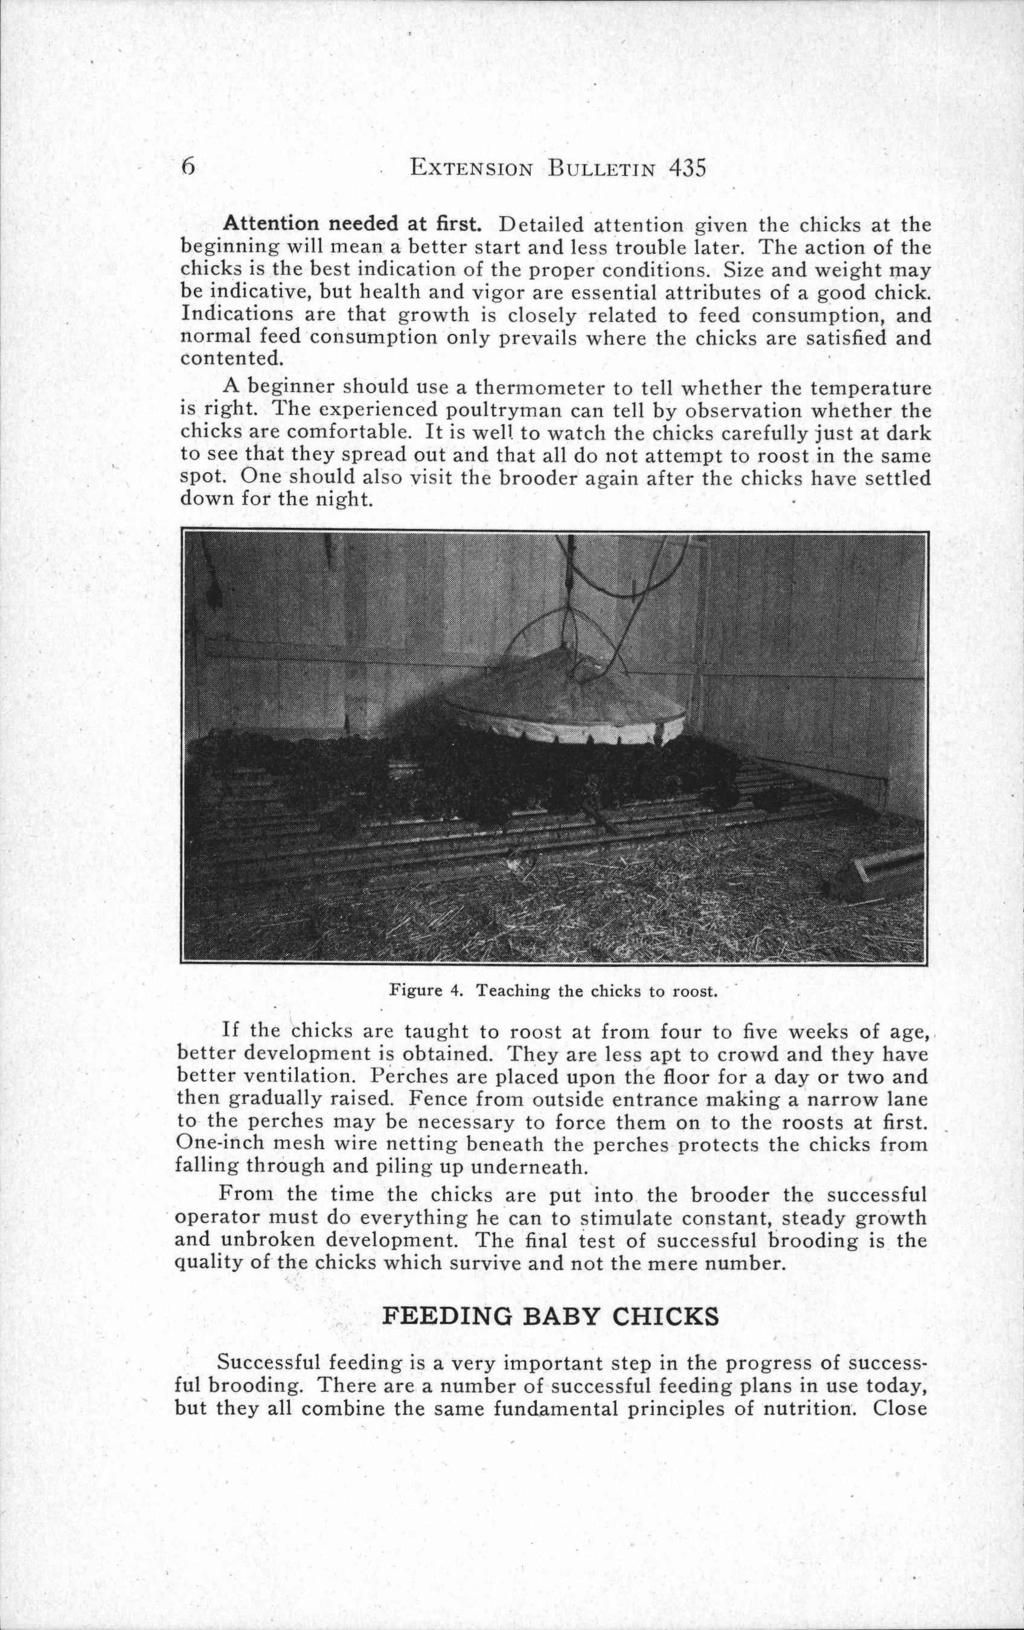 EXTENSION 6. BULLETIN 435 Attention needed at first. Detailed attention given the chicks at the beginning will mean a better start and less trouble later.